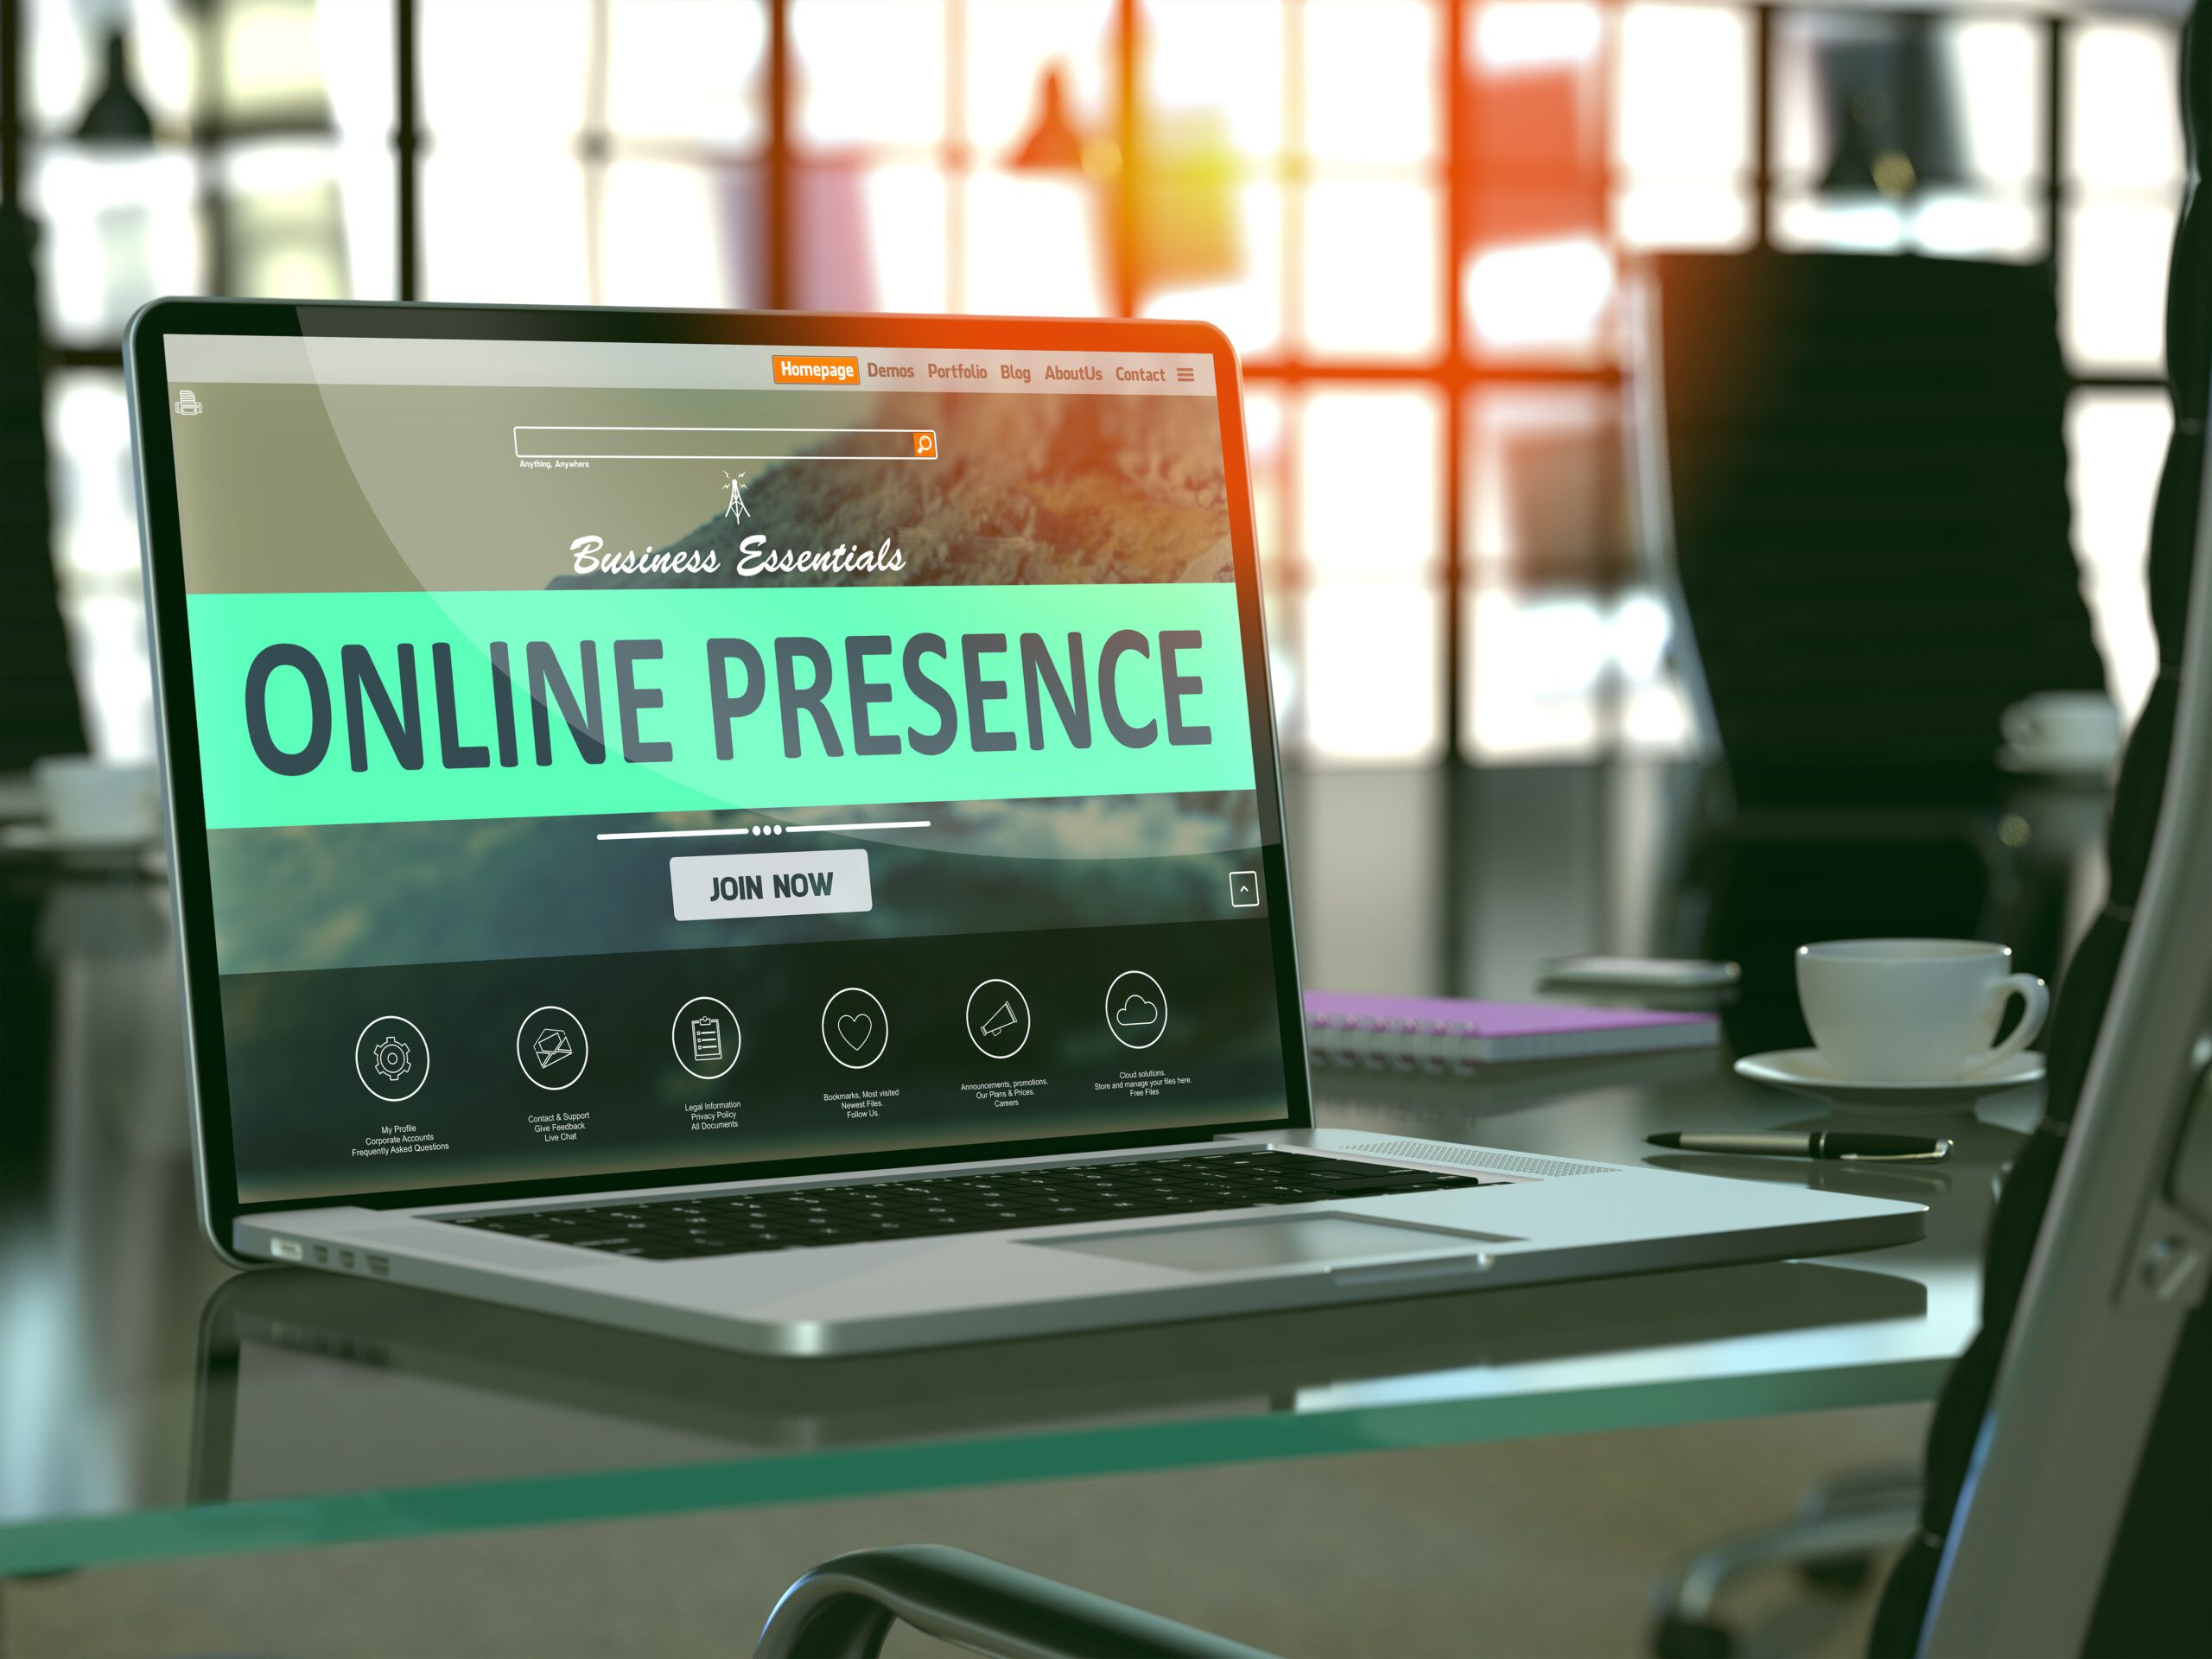 Keeping a Growing Presence for an Online Business Travel Franchise